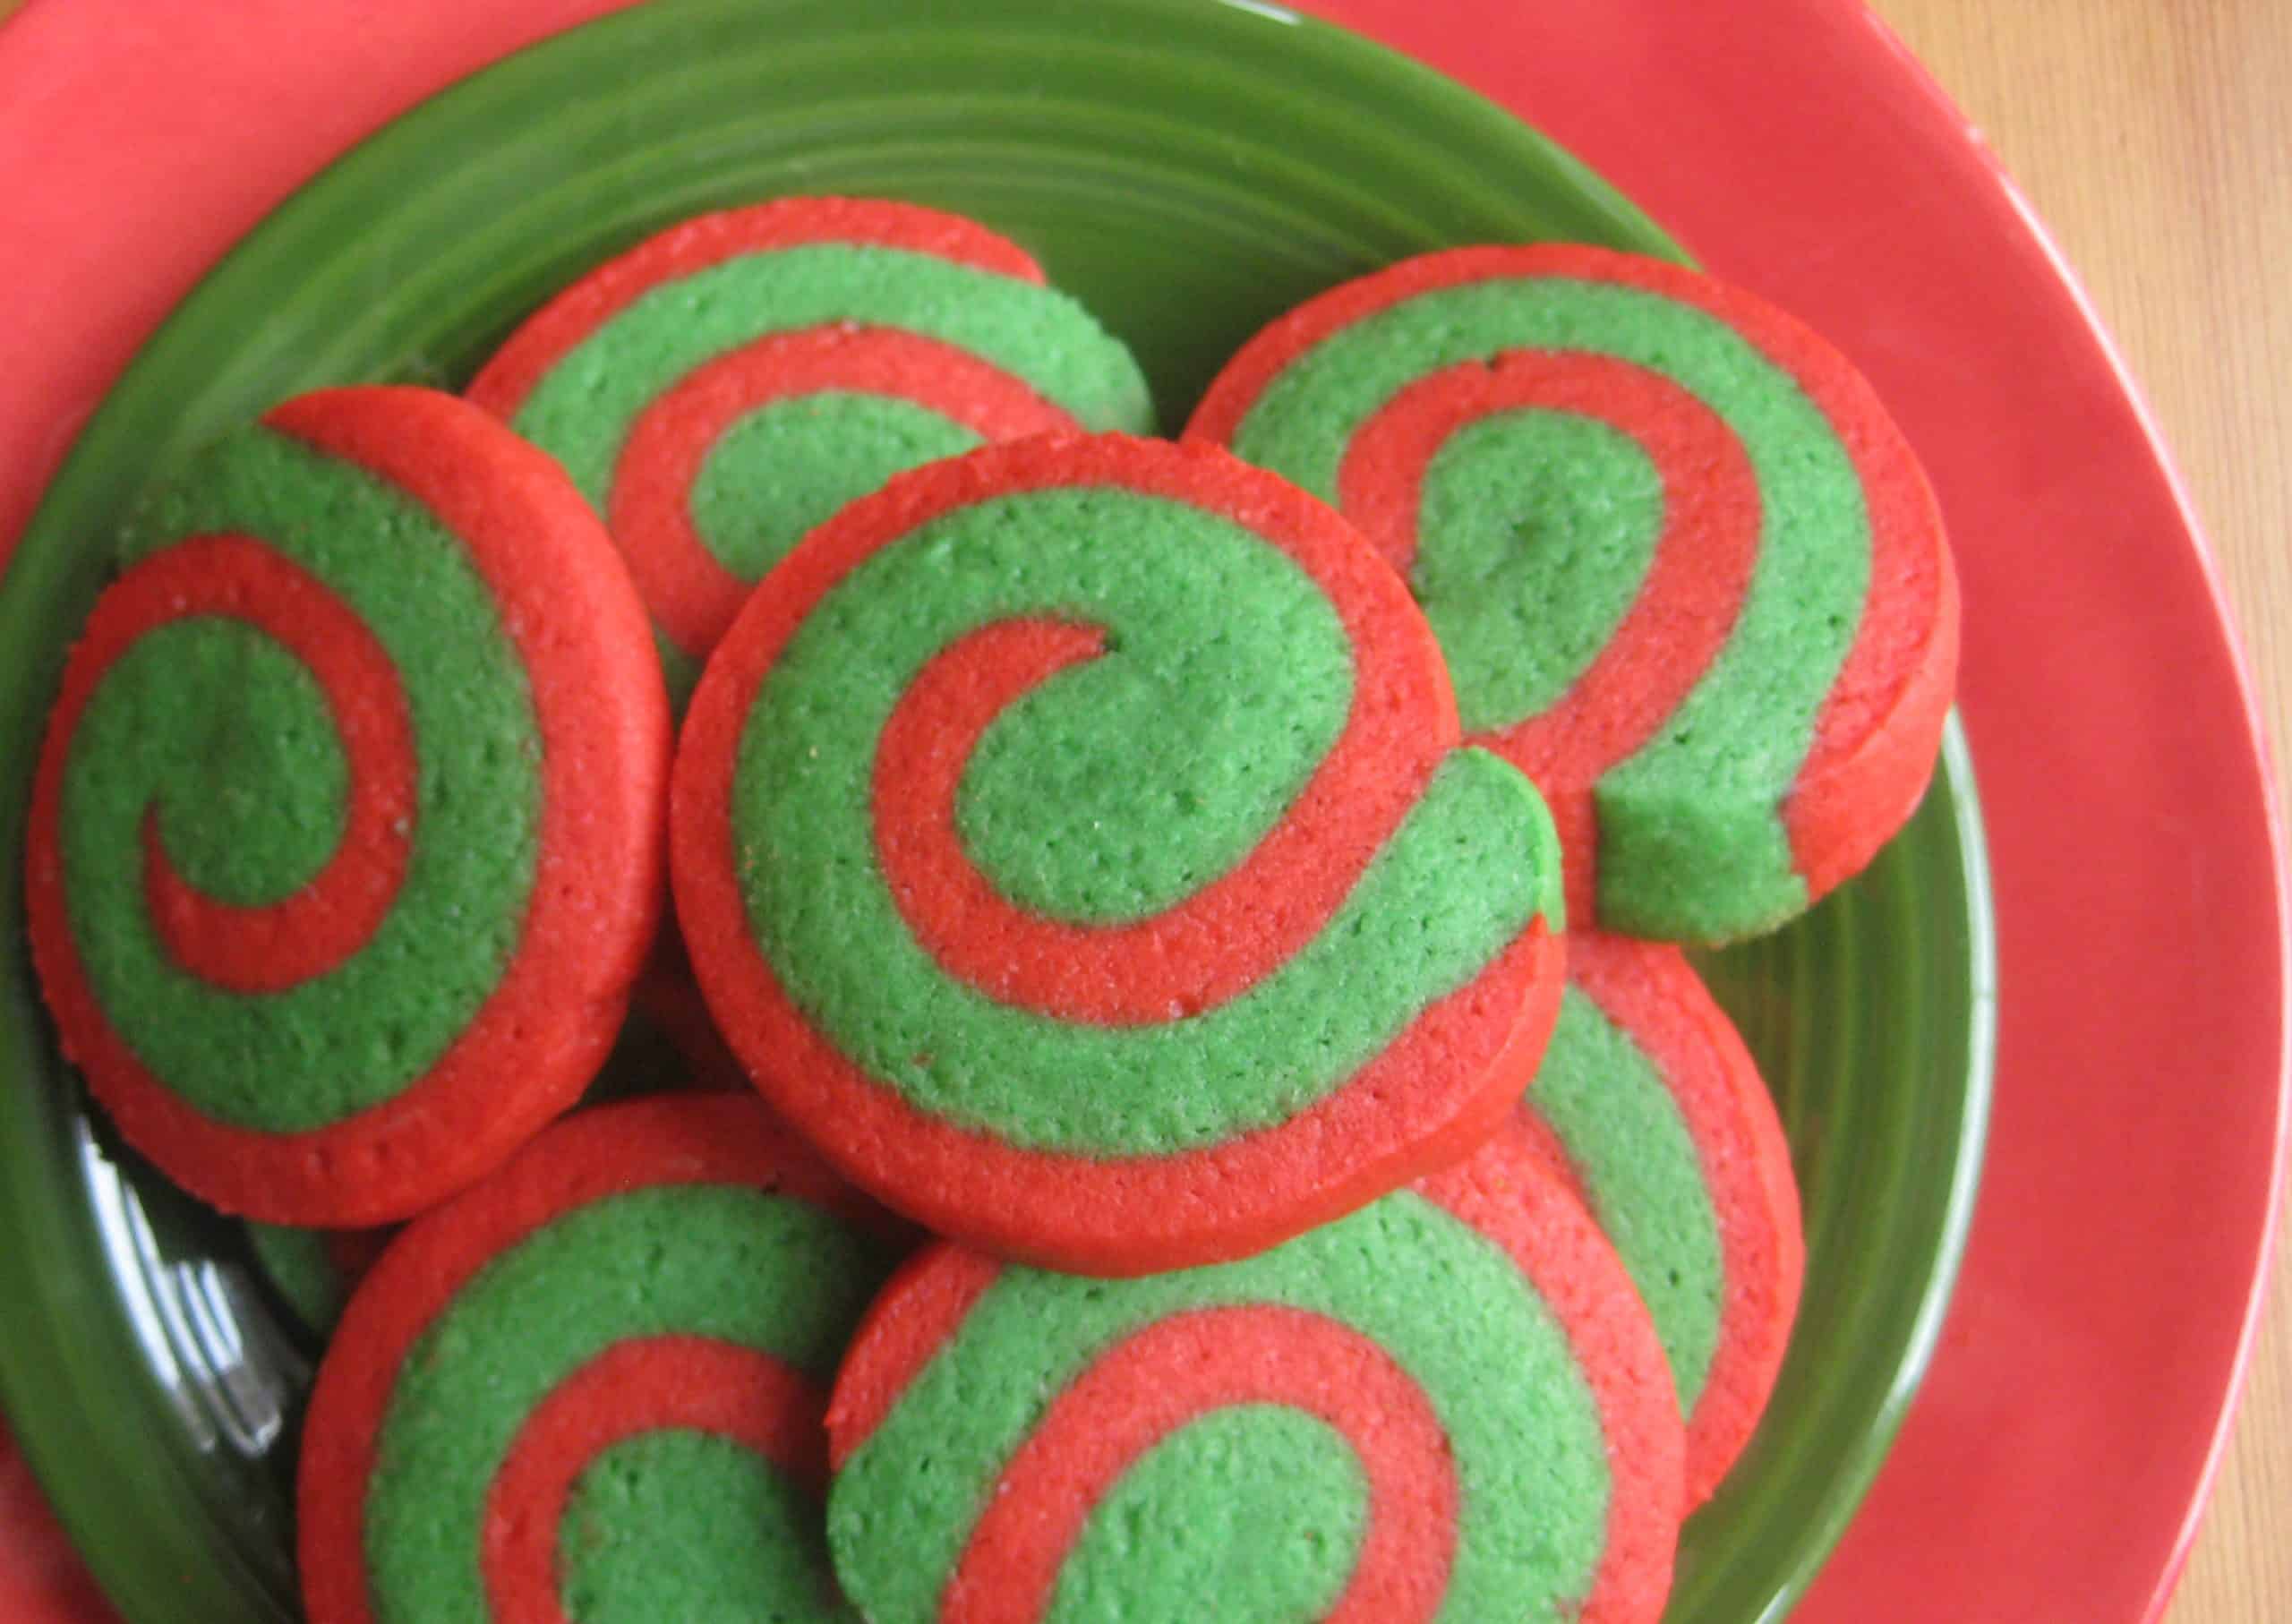 pinwheel cookies on a red and green plate